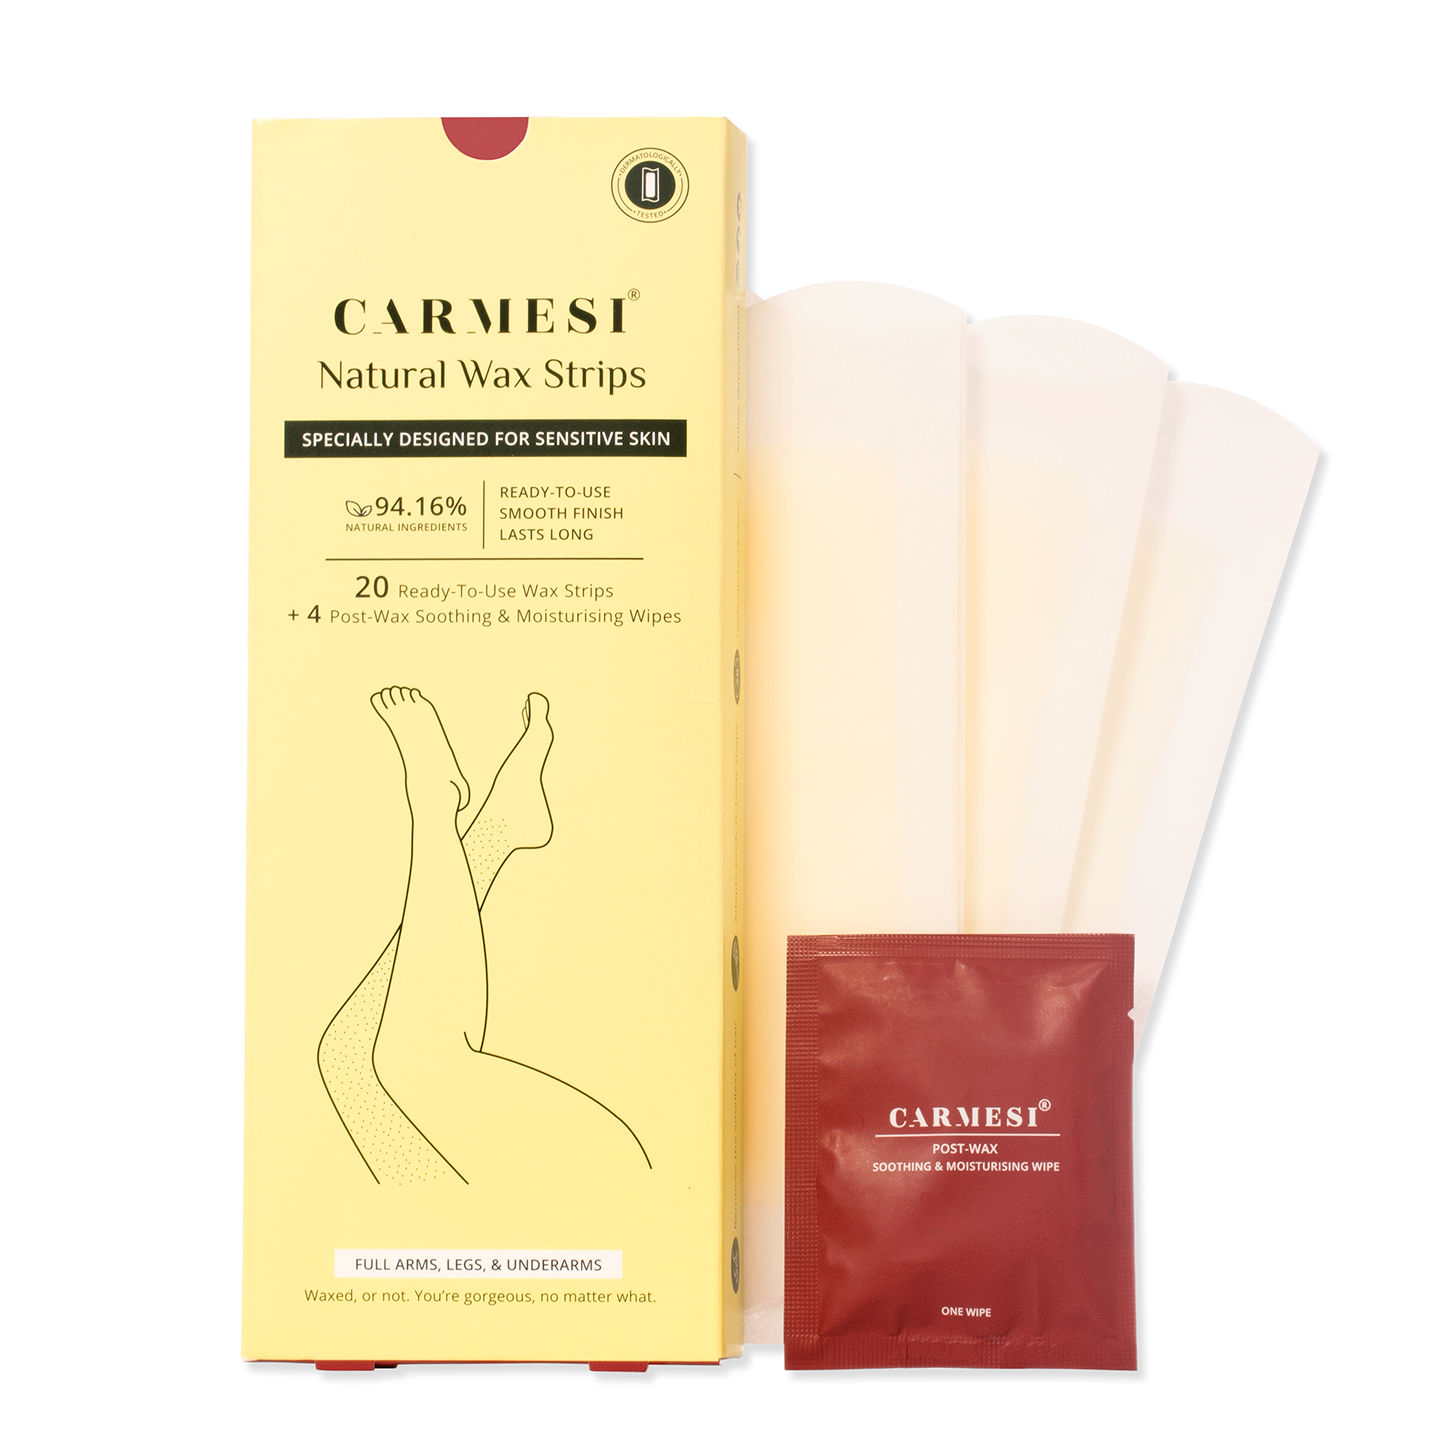 Buy Carmesi Natural Body Wax Strips (Gentle on All Skin Types - 94.16% Natural) - 20 Wax Strips + 4 Post-Wax Wipes - Purplle